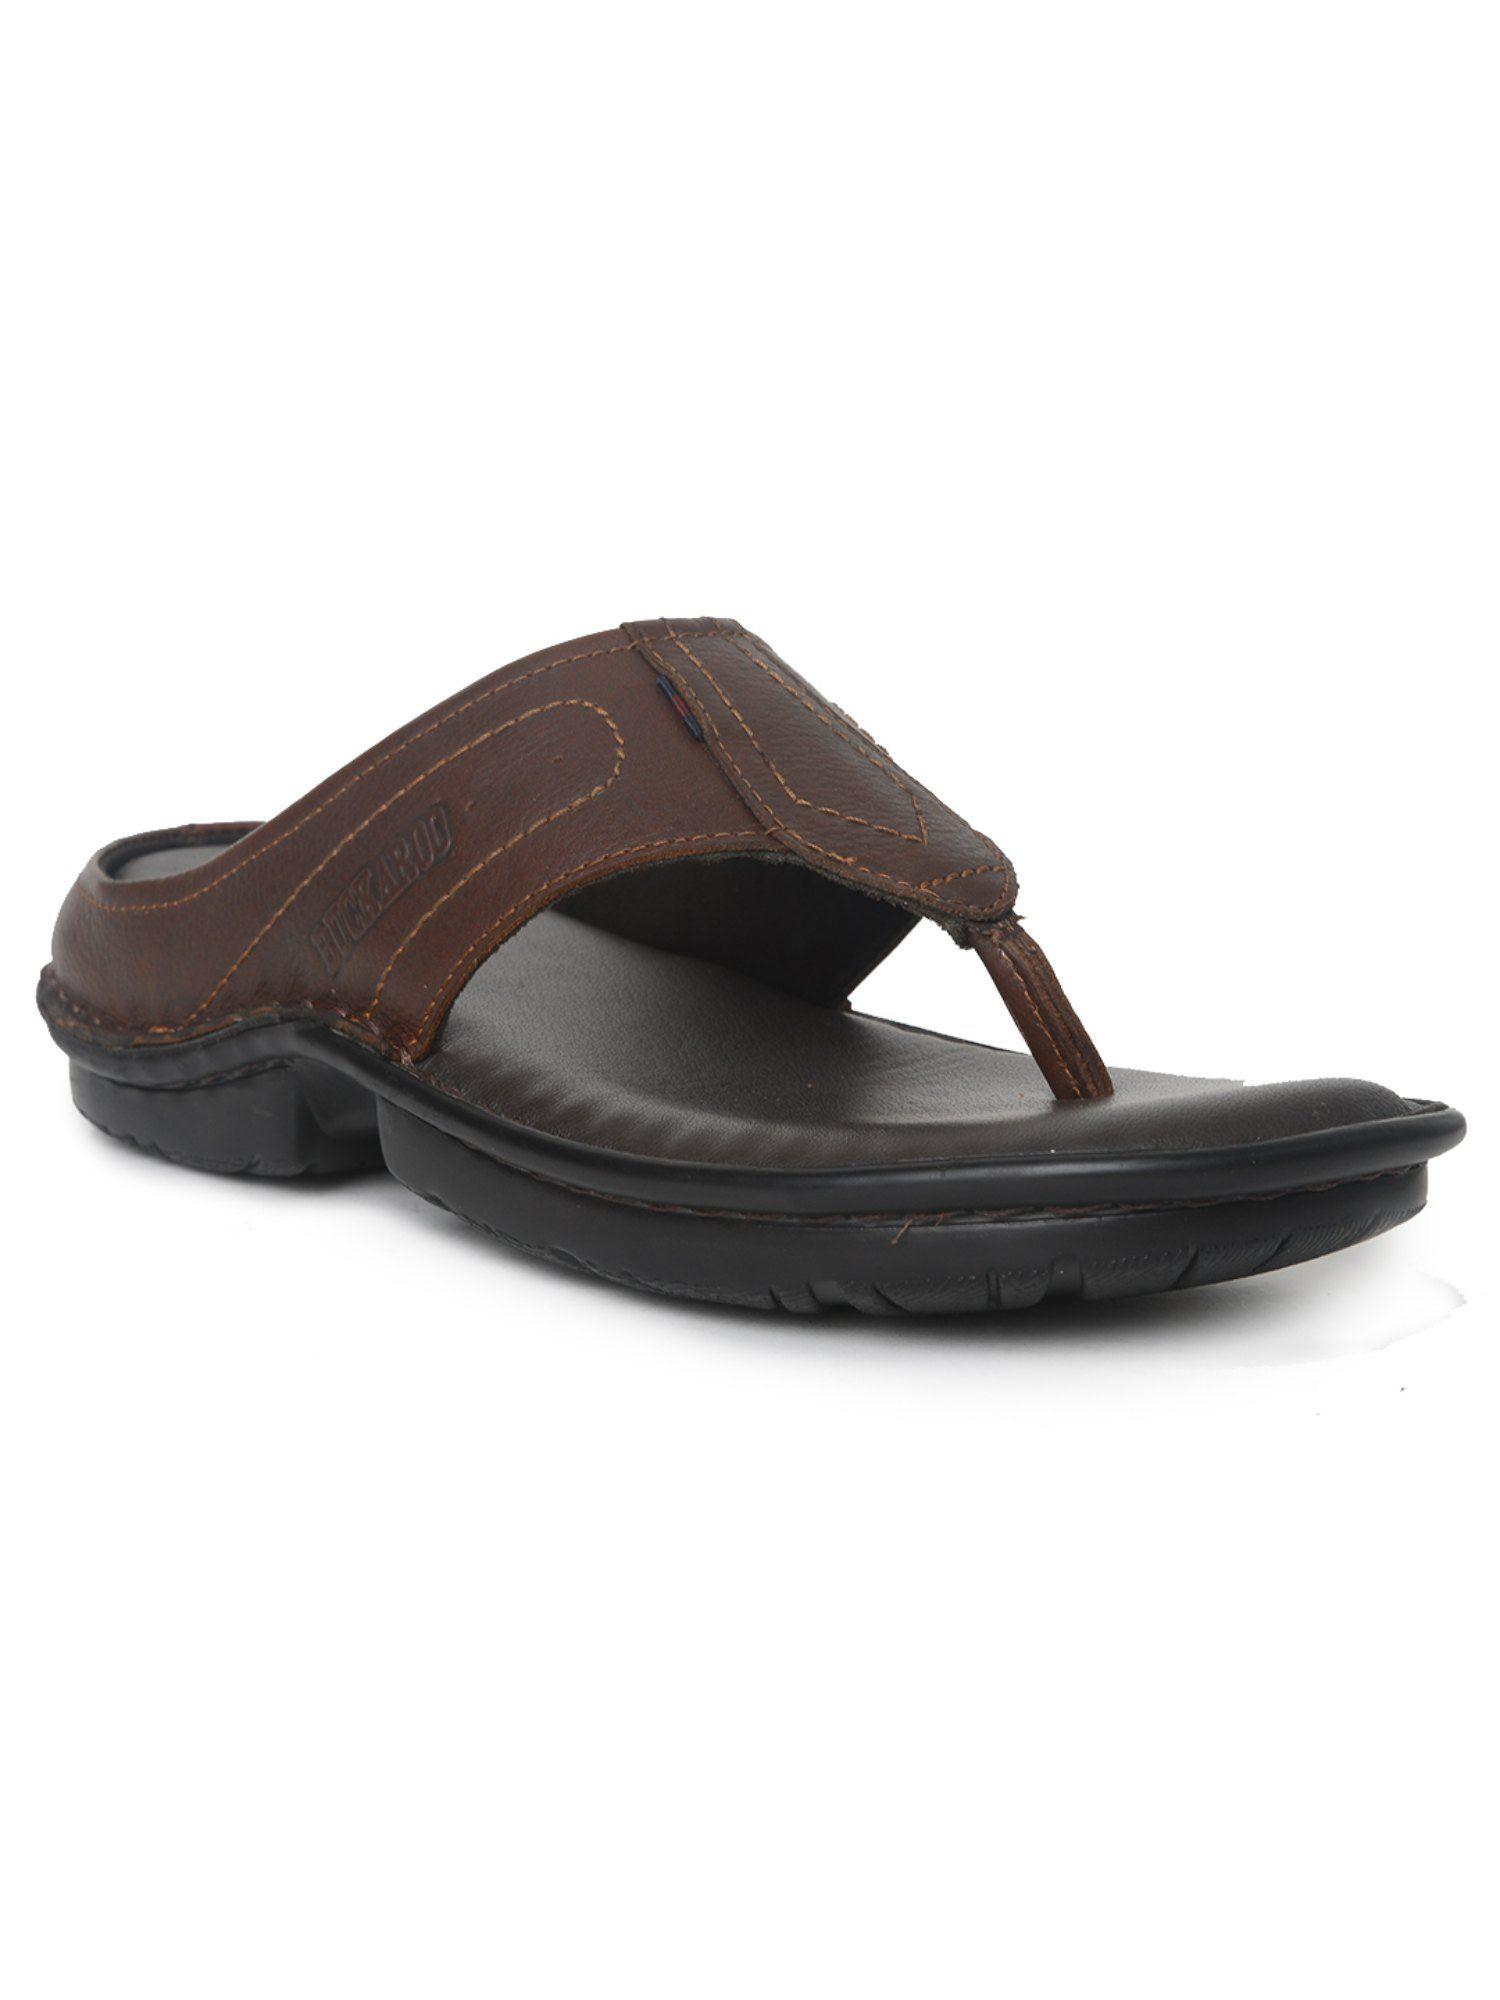 new-morris-genuine-leather-brown-casual-open-sandal-for-men